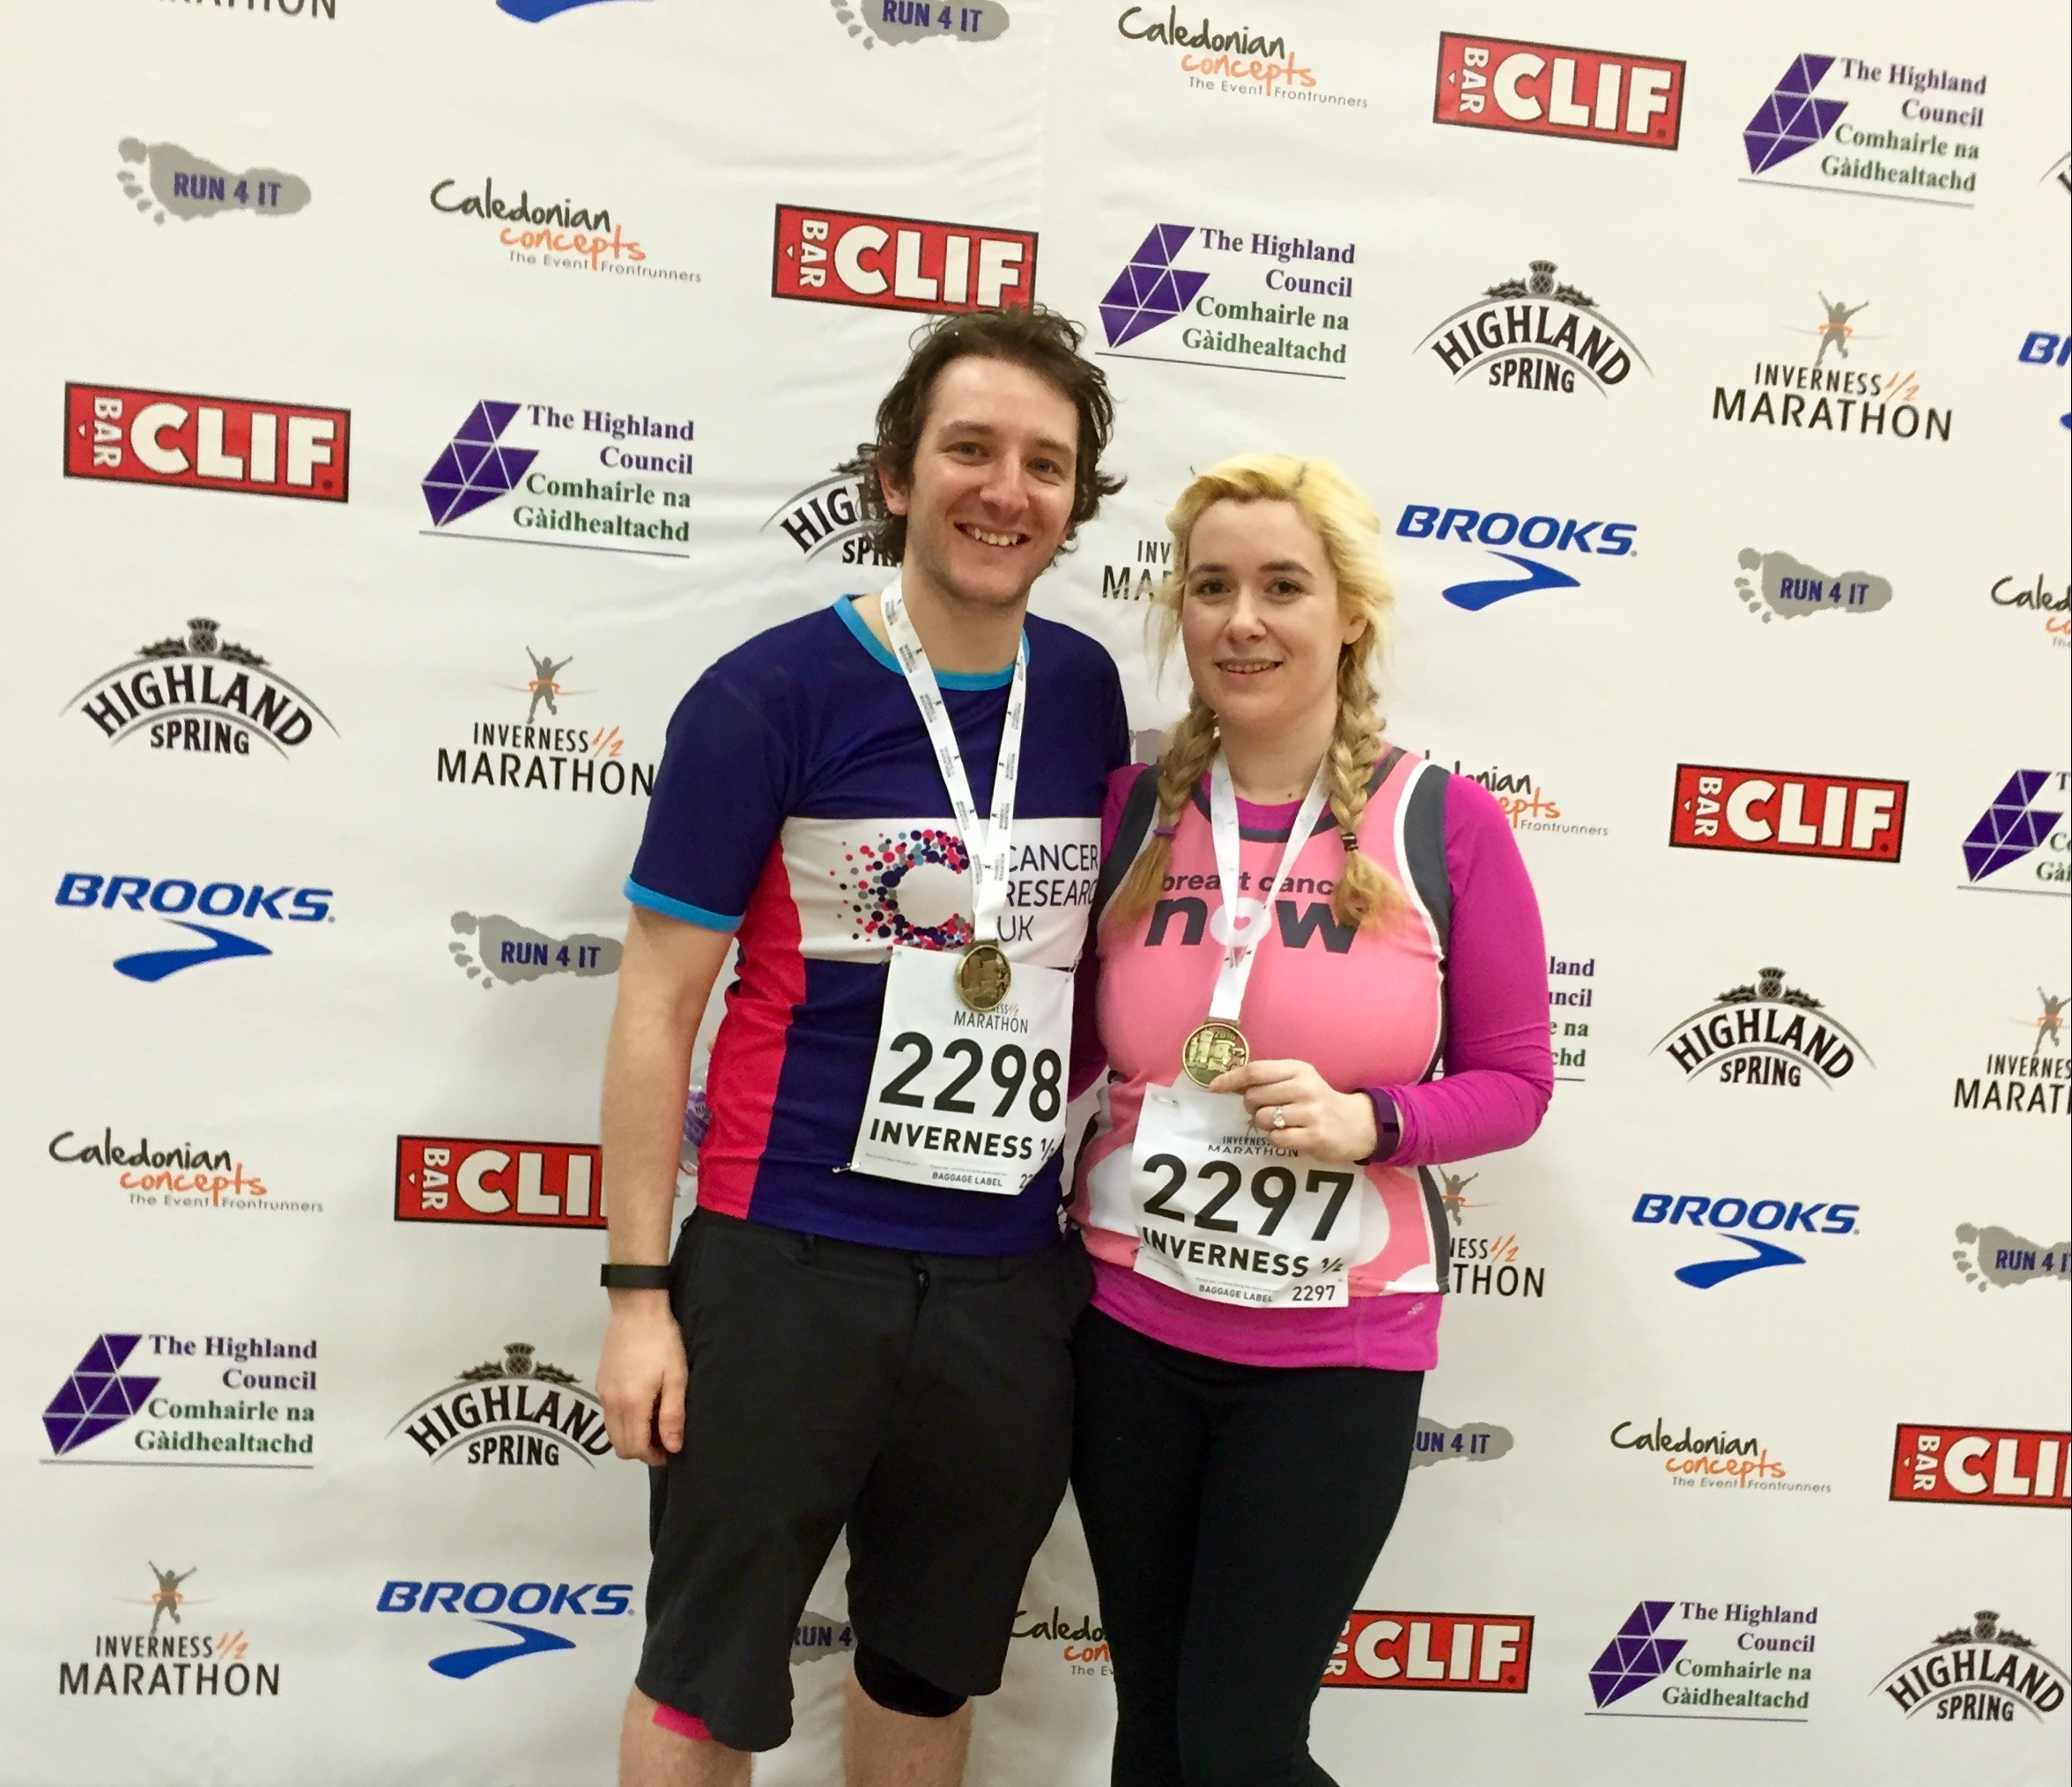 The couple took on the Inverness half-marathon  as pert of training